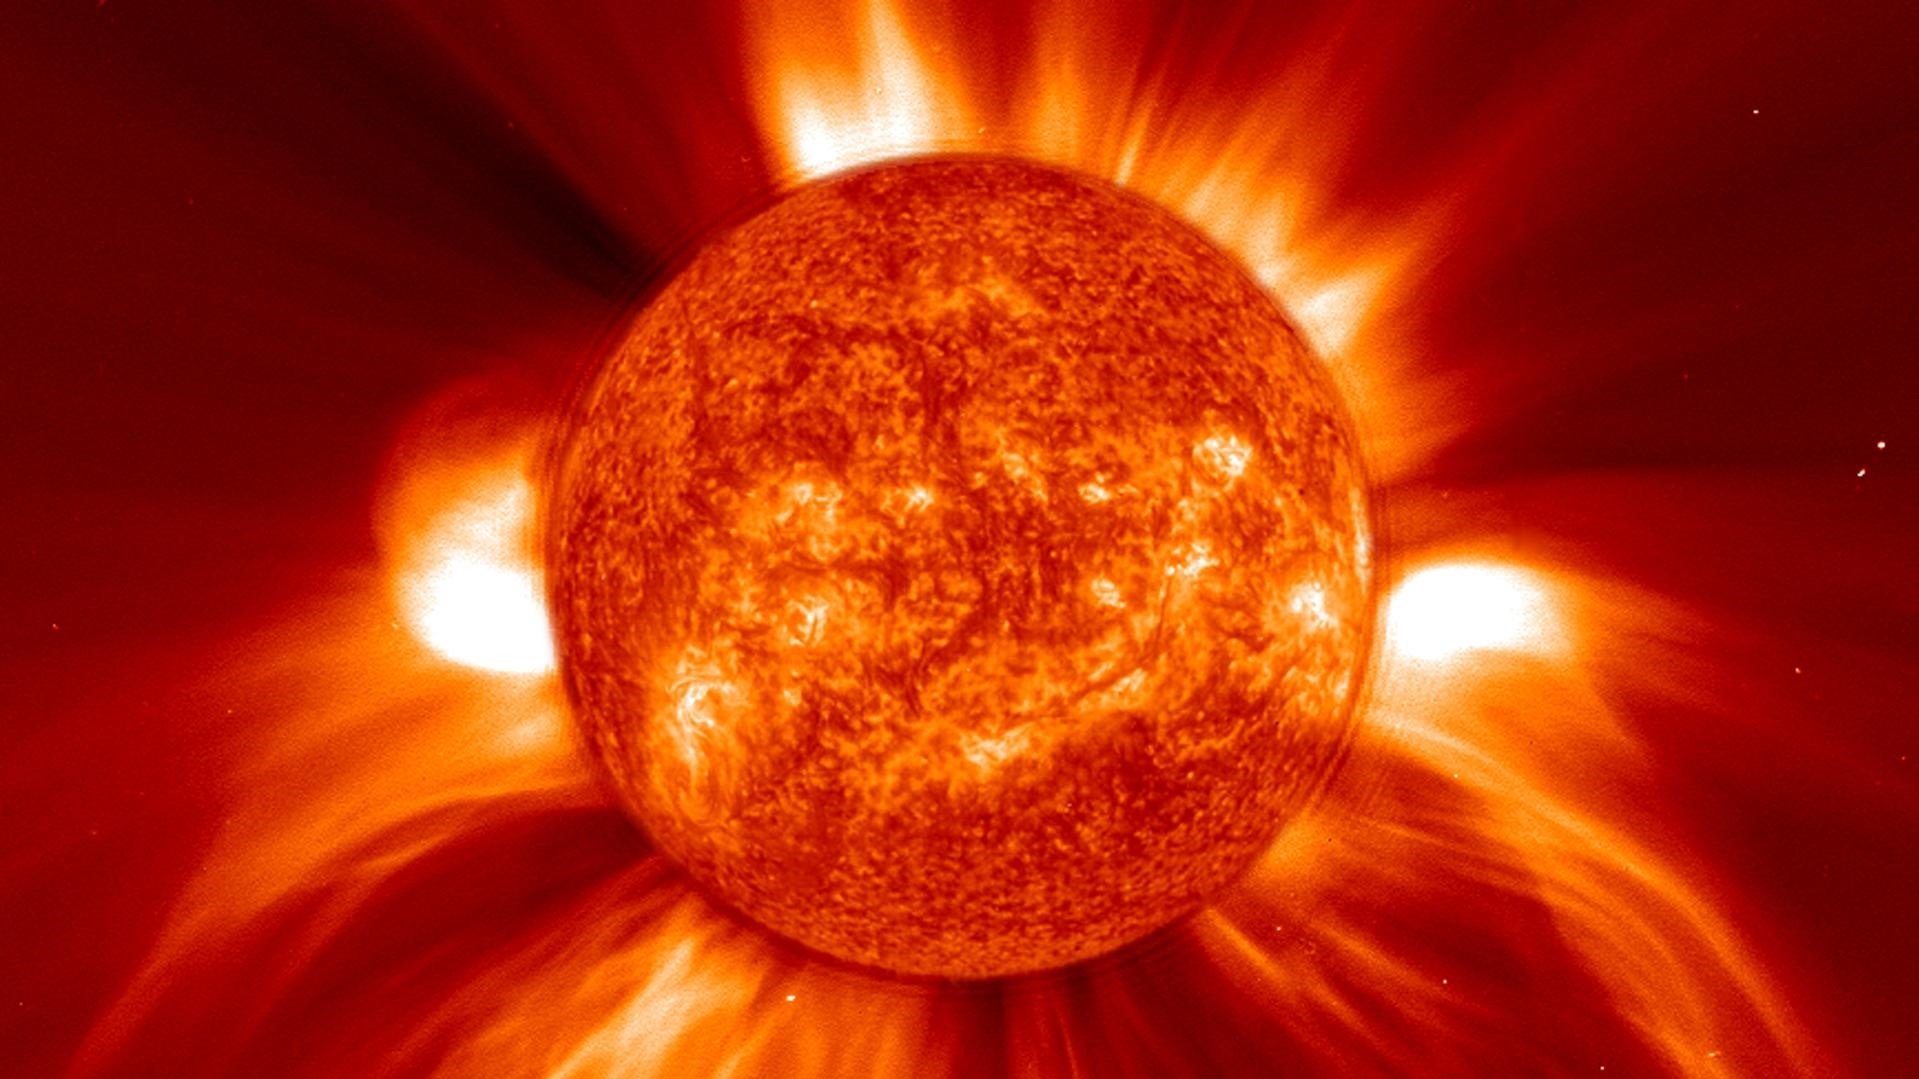 Extreme solar storms can strike out of the blue. Are we really prepared?